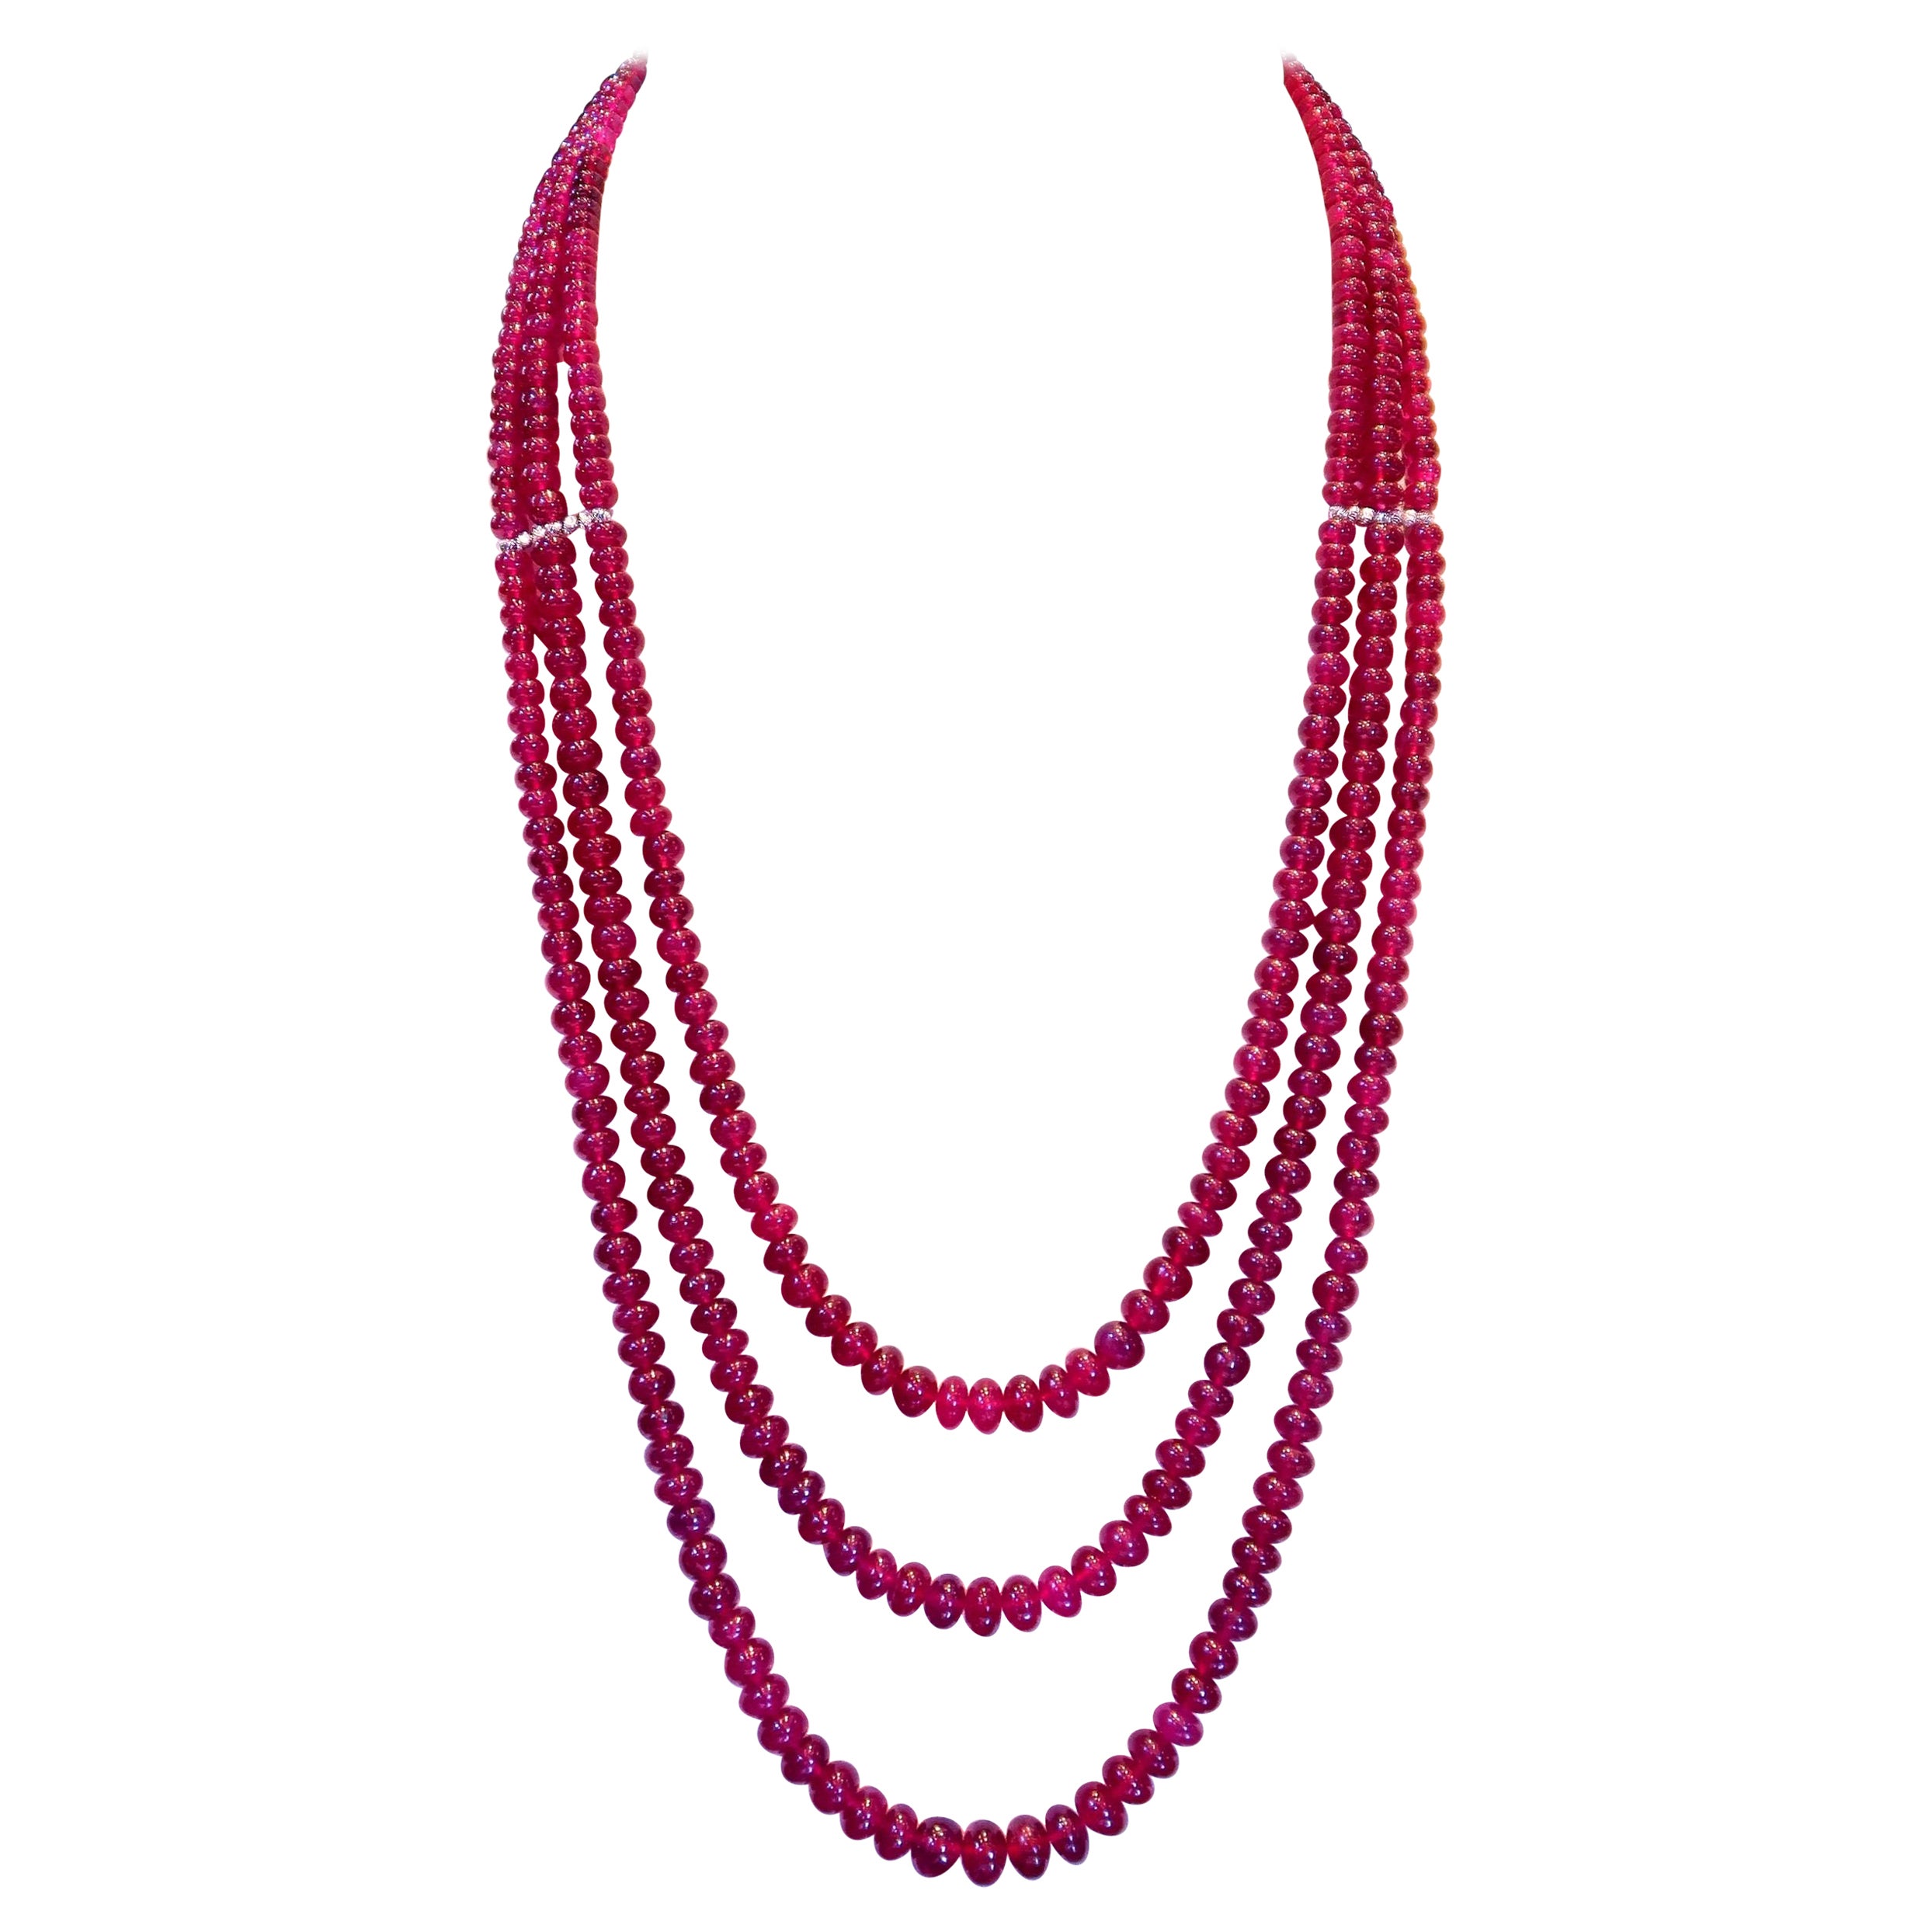 Triple Strand Ruby Bead Necklace with Faceted Diamond Cut White Gold Bar Spacers